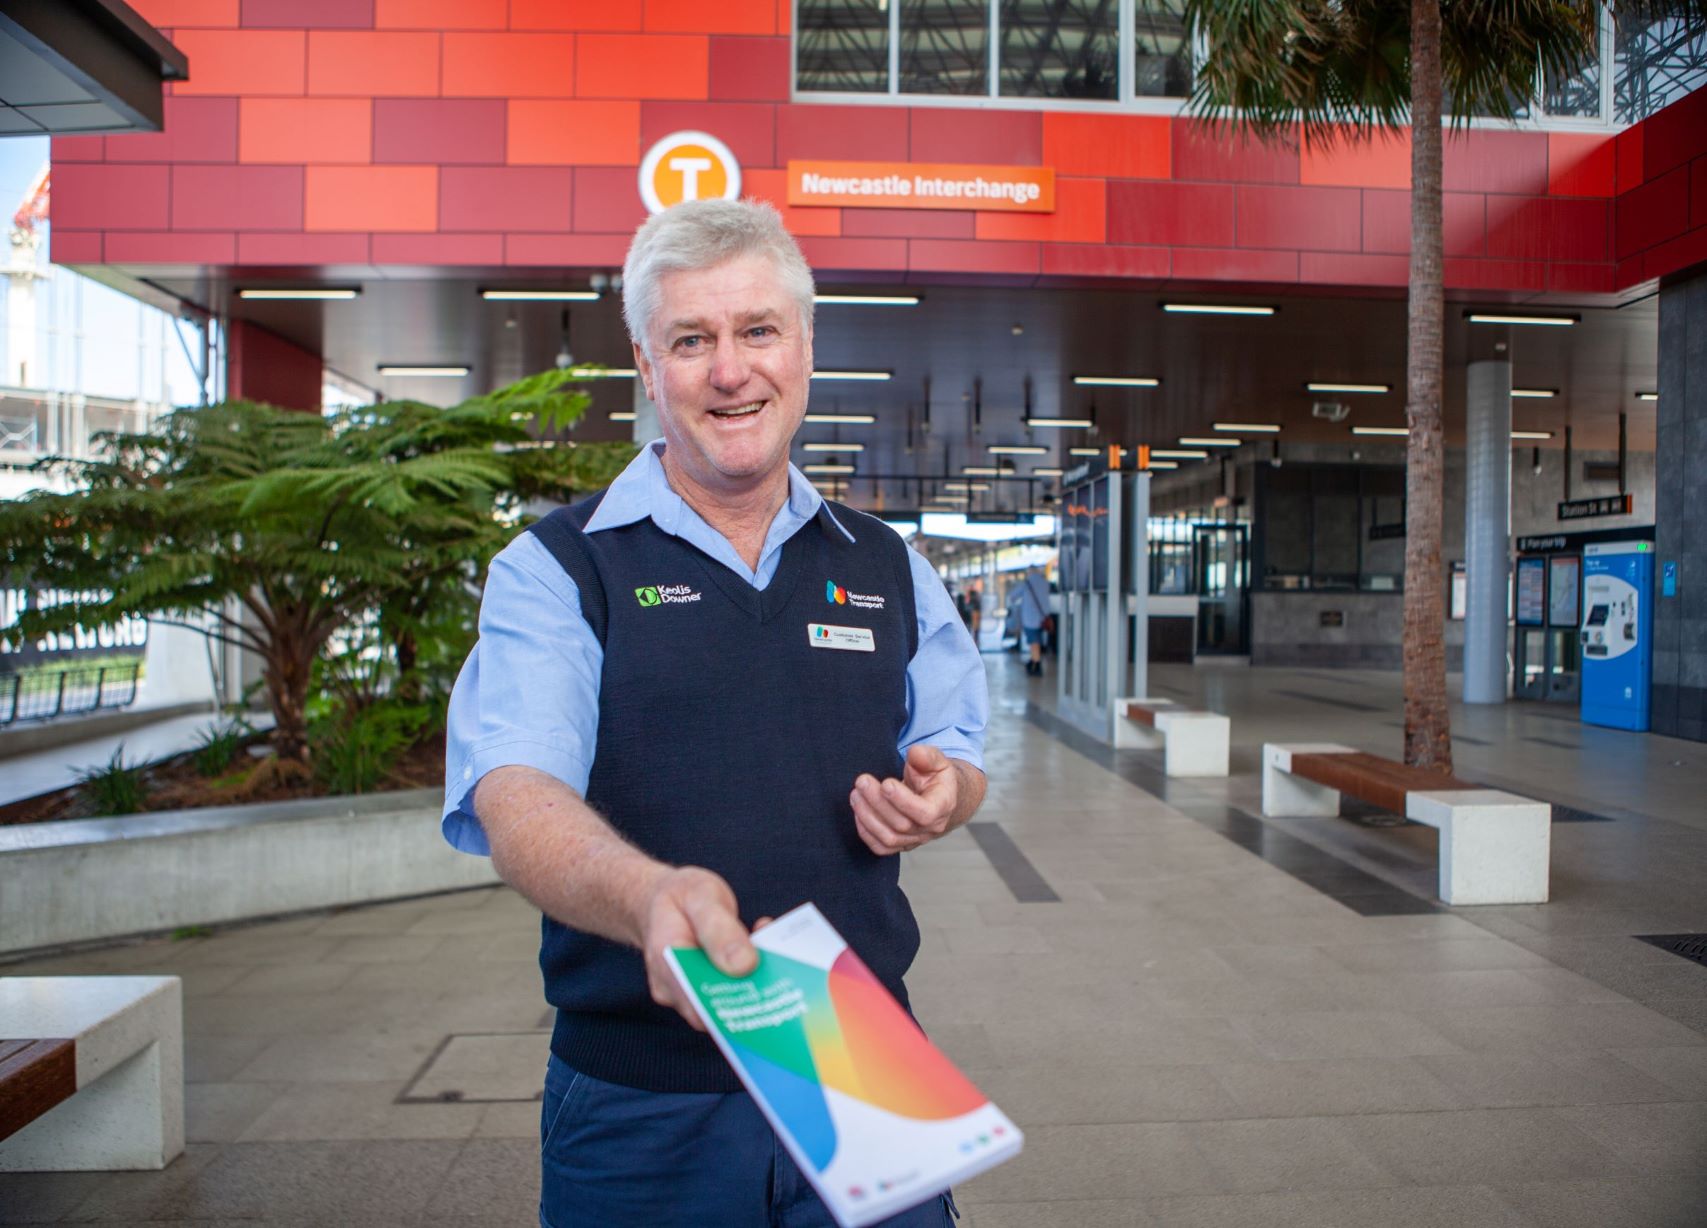 Newcastle Transport customer service officer smiling and holding out a brochure